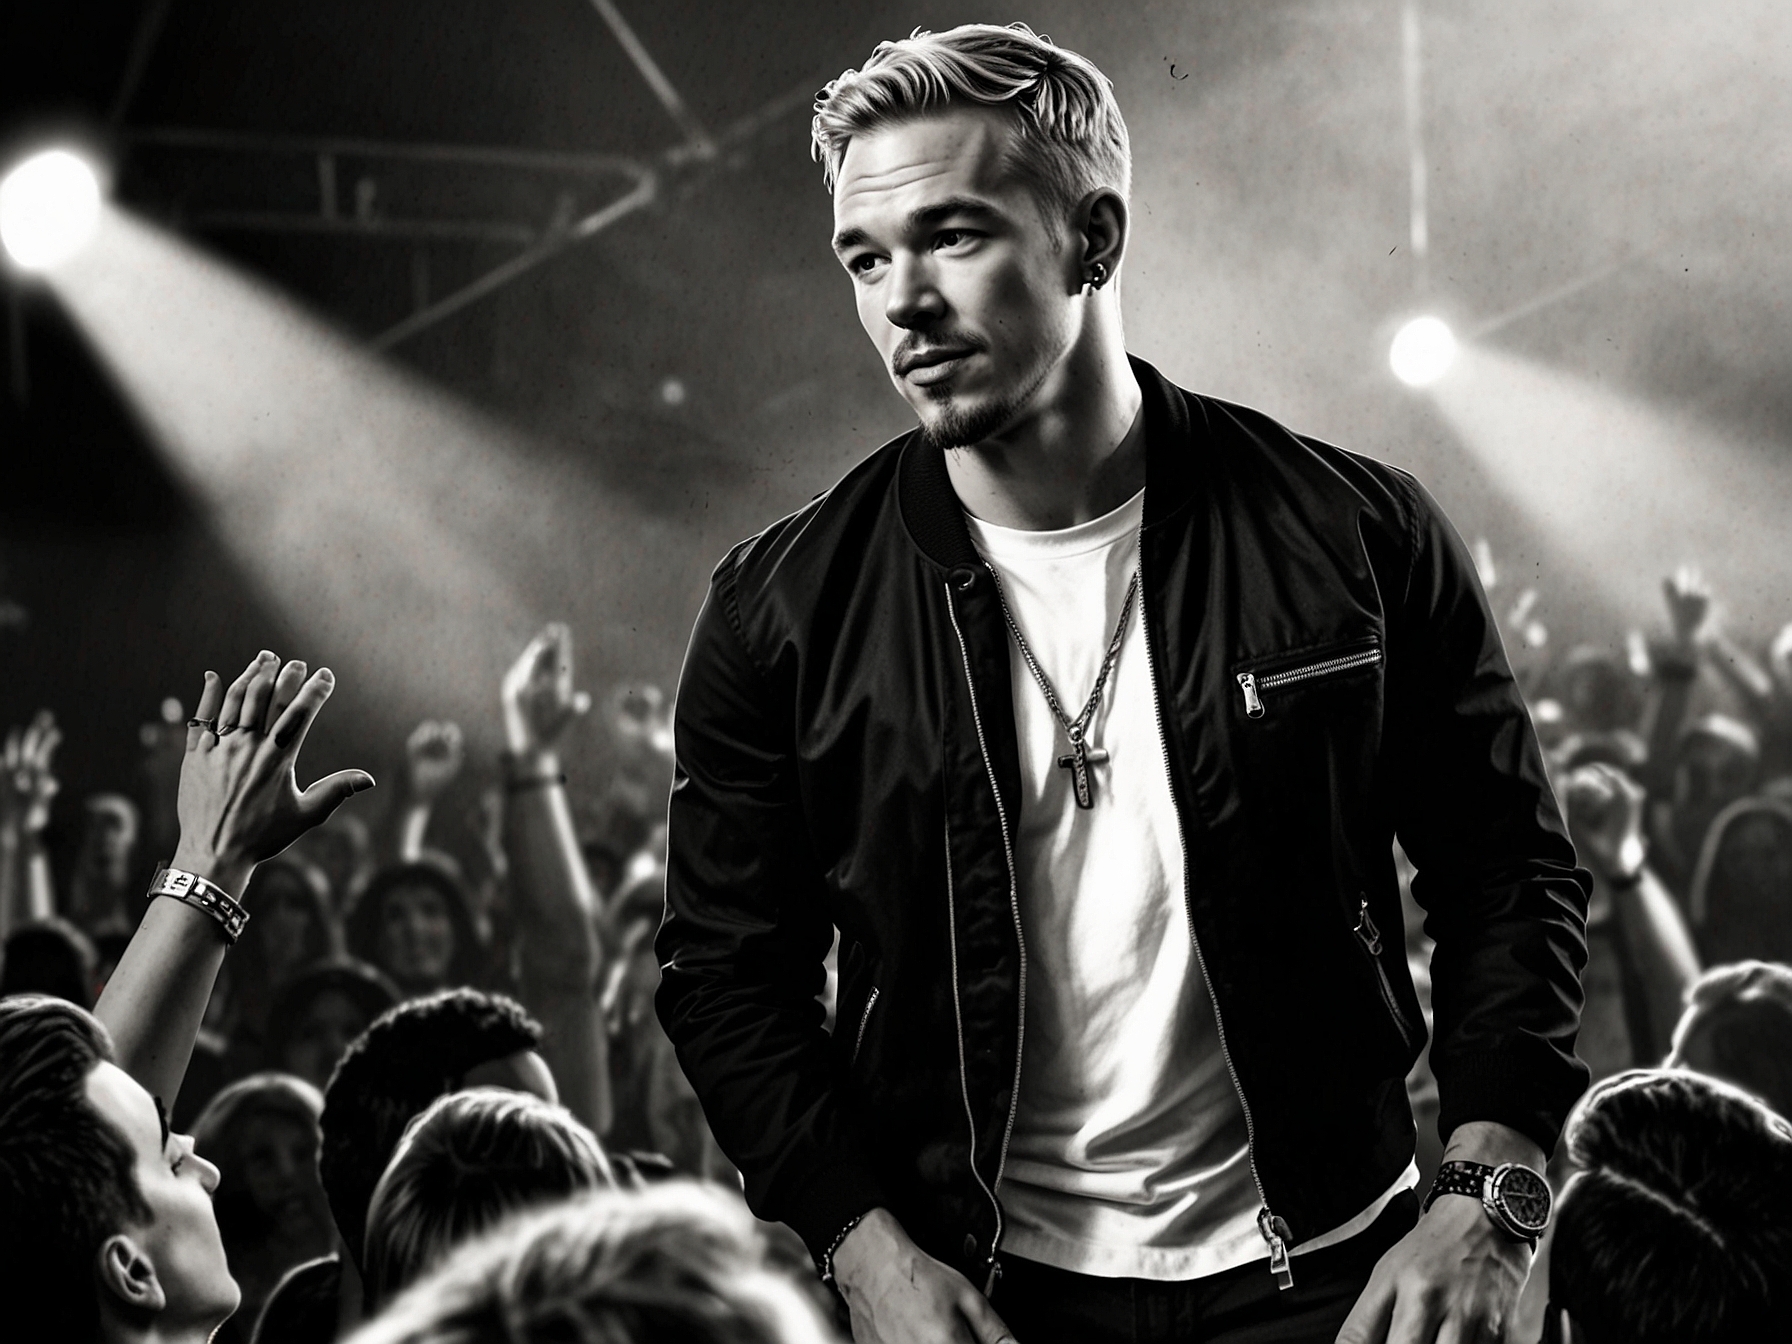 An image of Diplo performing at a concert, highlighting the contrast between his public persona and the serious personal allegations he faces in the lawsuit over unauthorized distribution of explicit content.